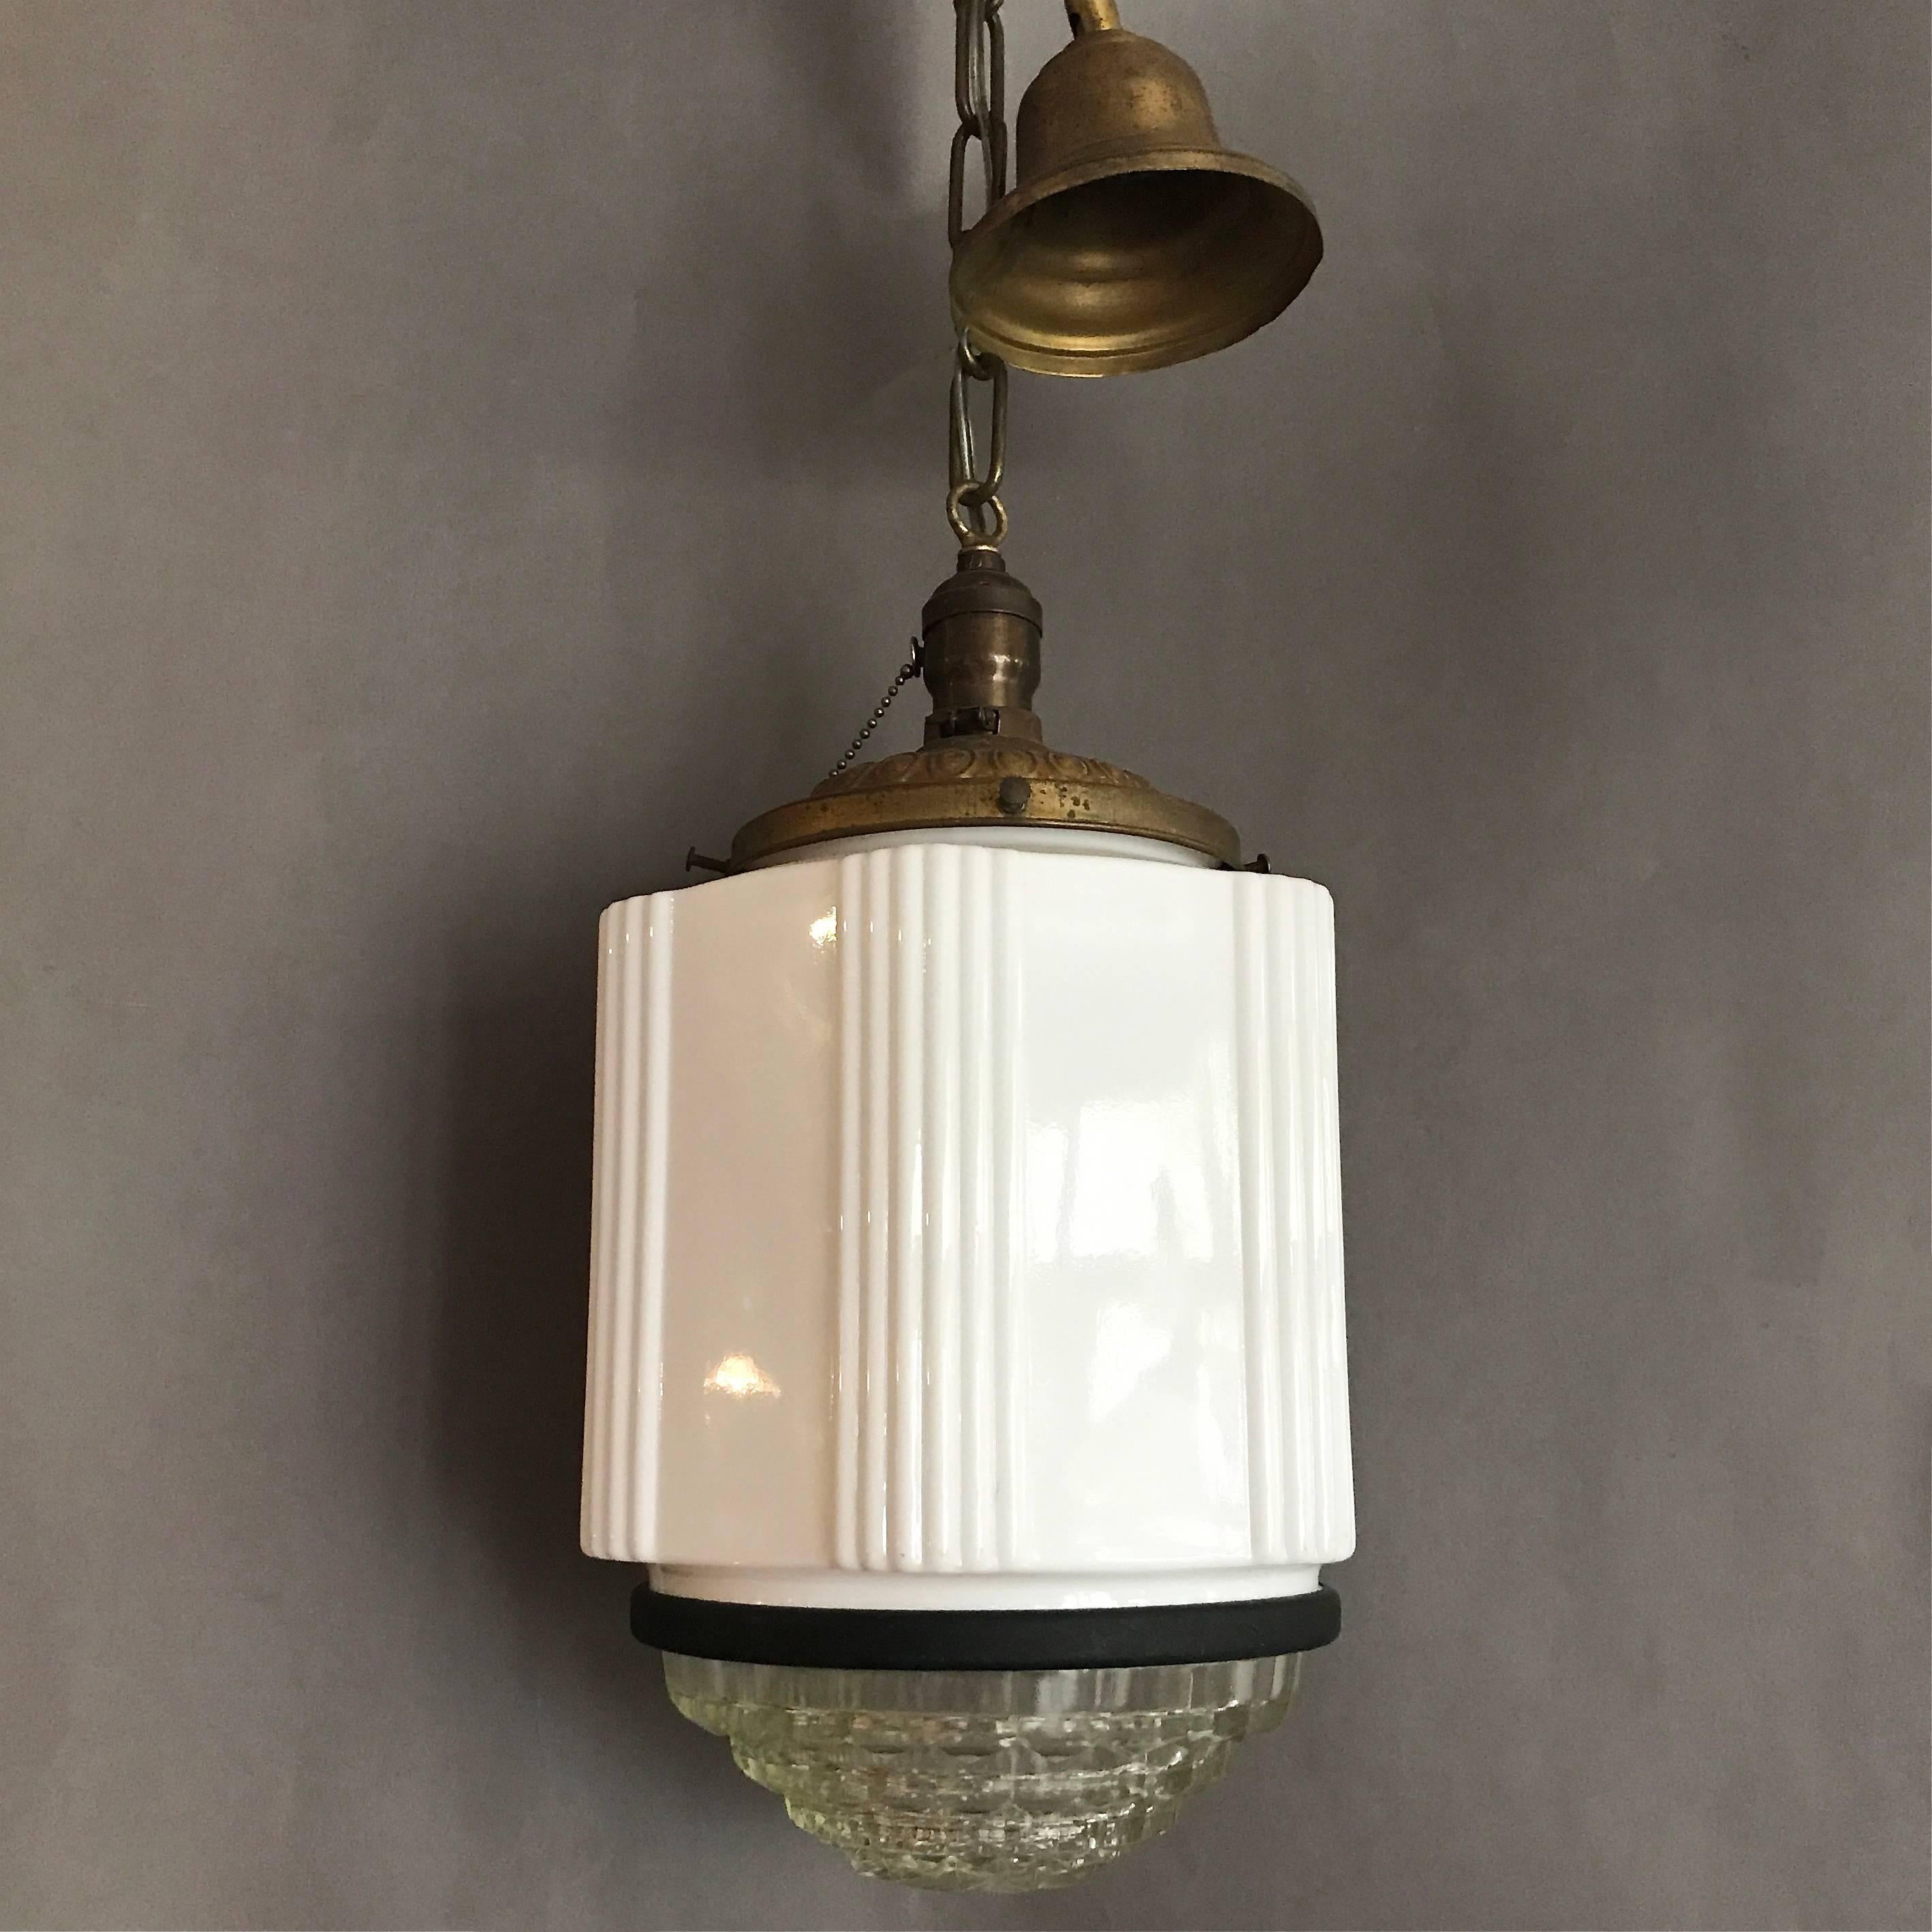 Art Deco, milk glass pendant has six sides with clear glass lens and brass hardware.

Measures: Overall height: 44in height.